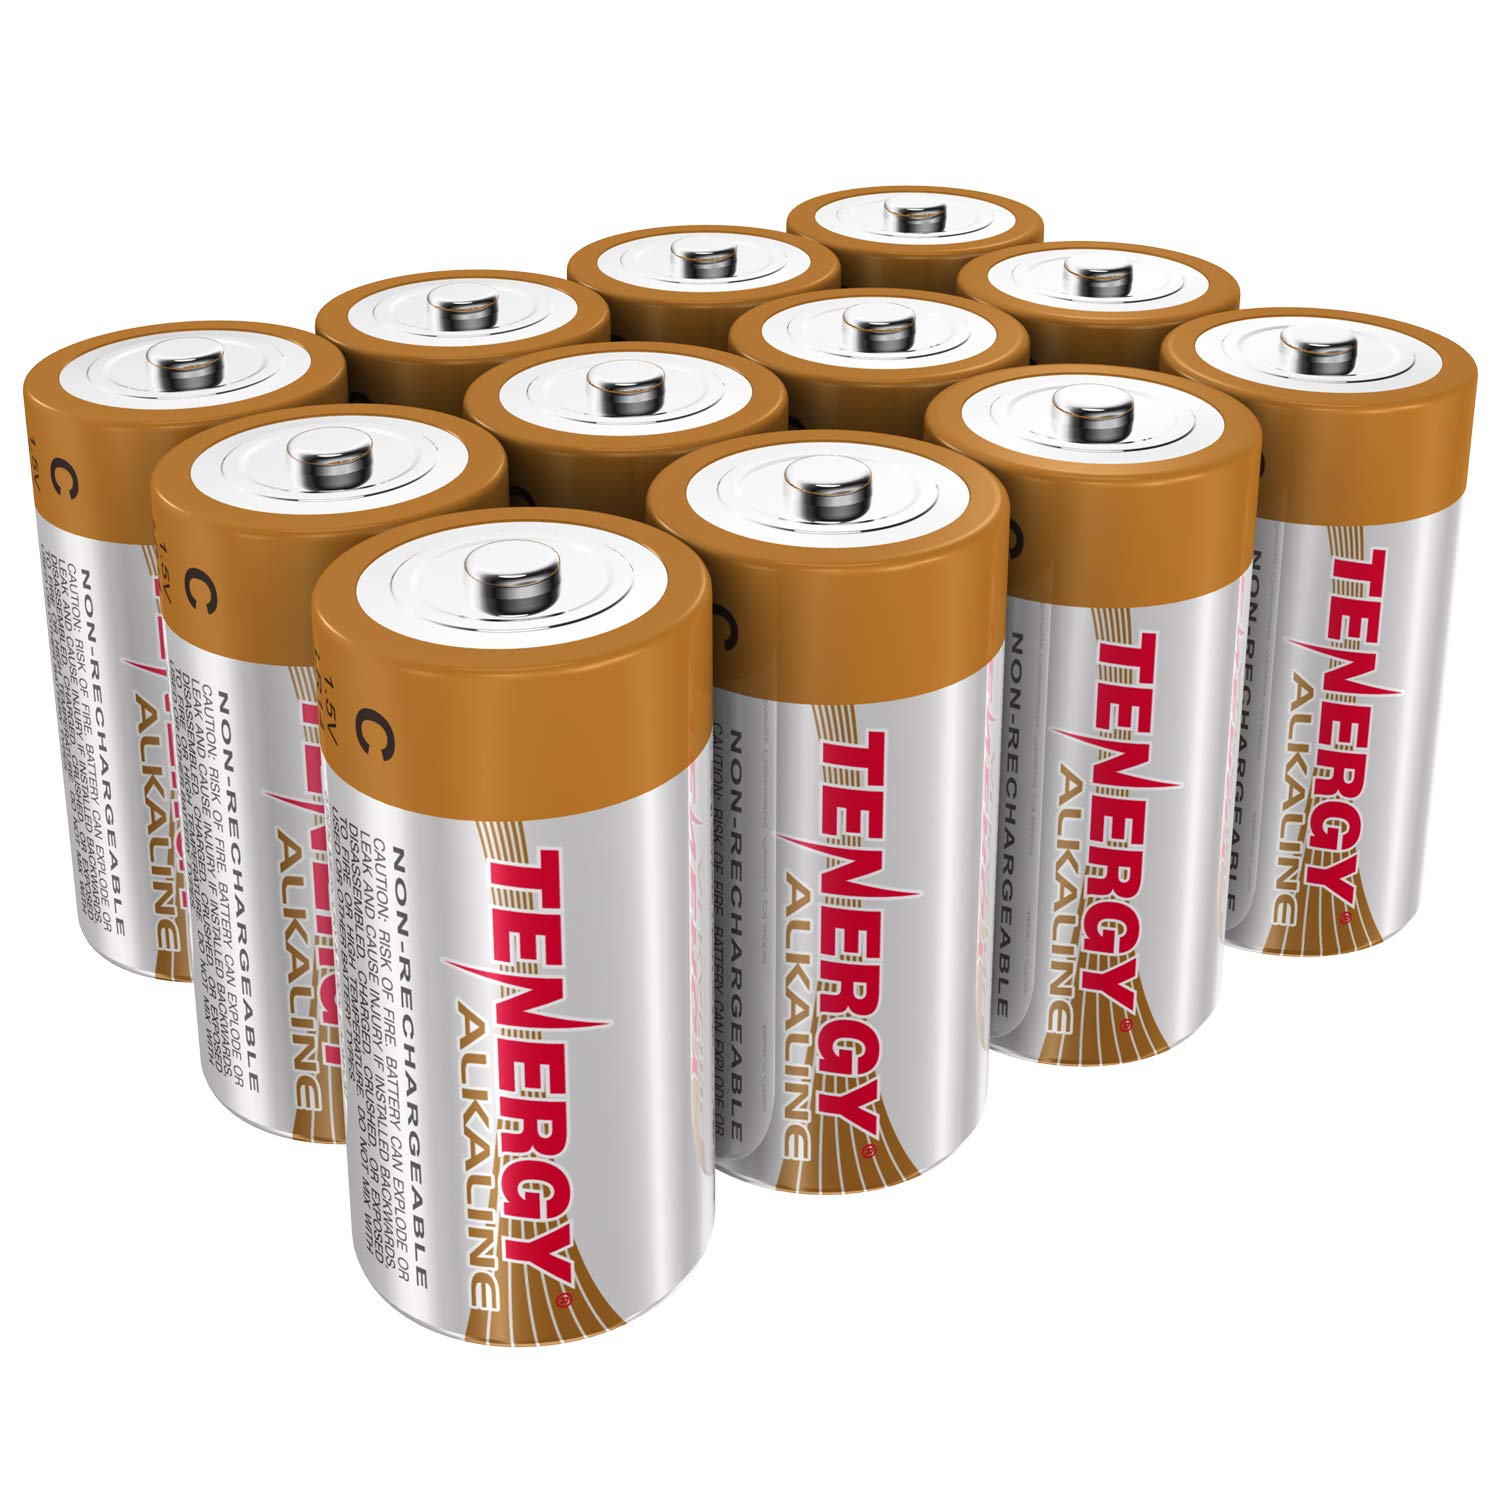 Tenergy 1.5VC Alkaline LR14 Battery, High Performance C Non-Rechargeable  Batteries for Clocks, Remotes, Toys & Electronic Devices, Replacement C  Cell